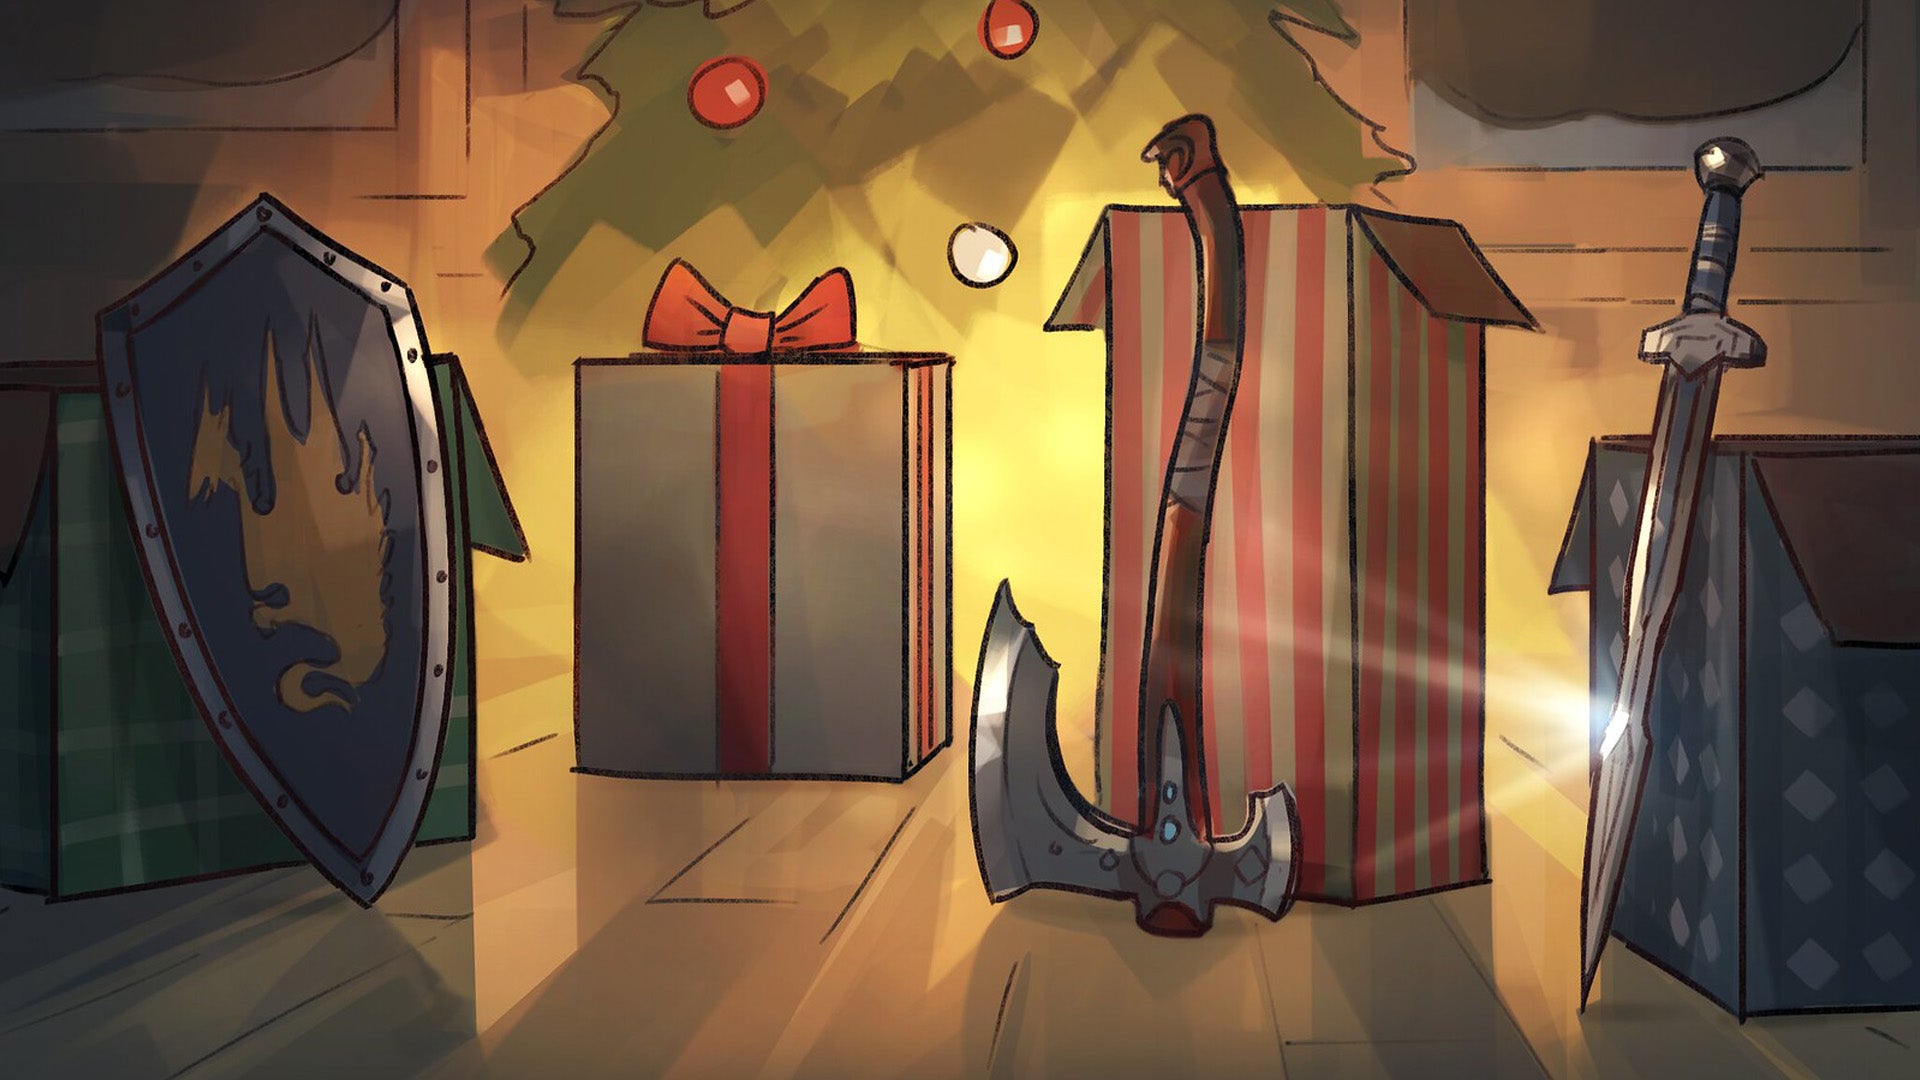 Demon’s Souls remake devs share a seasons greeting card that appears to be teasing… something